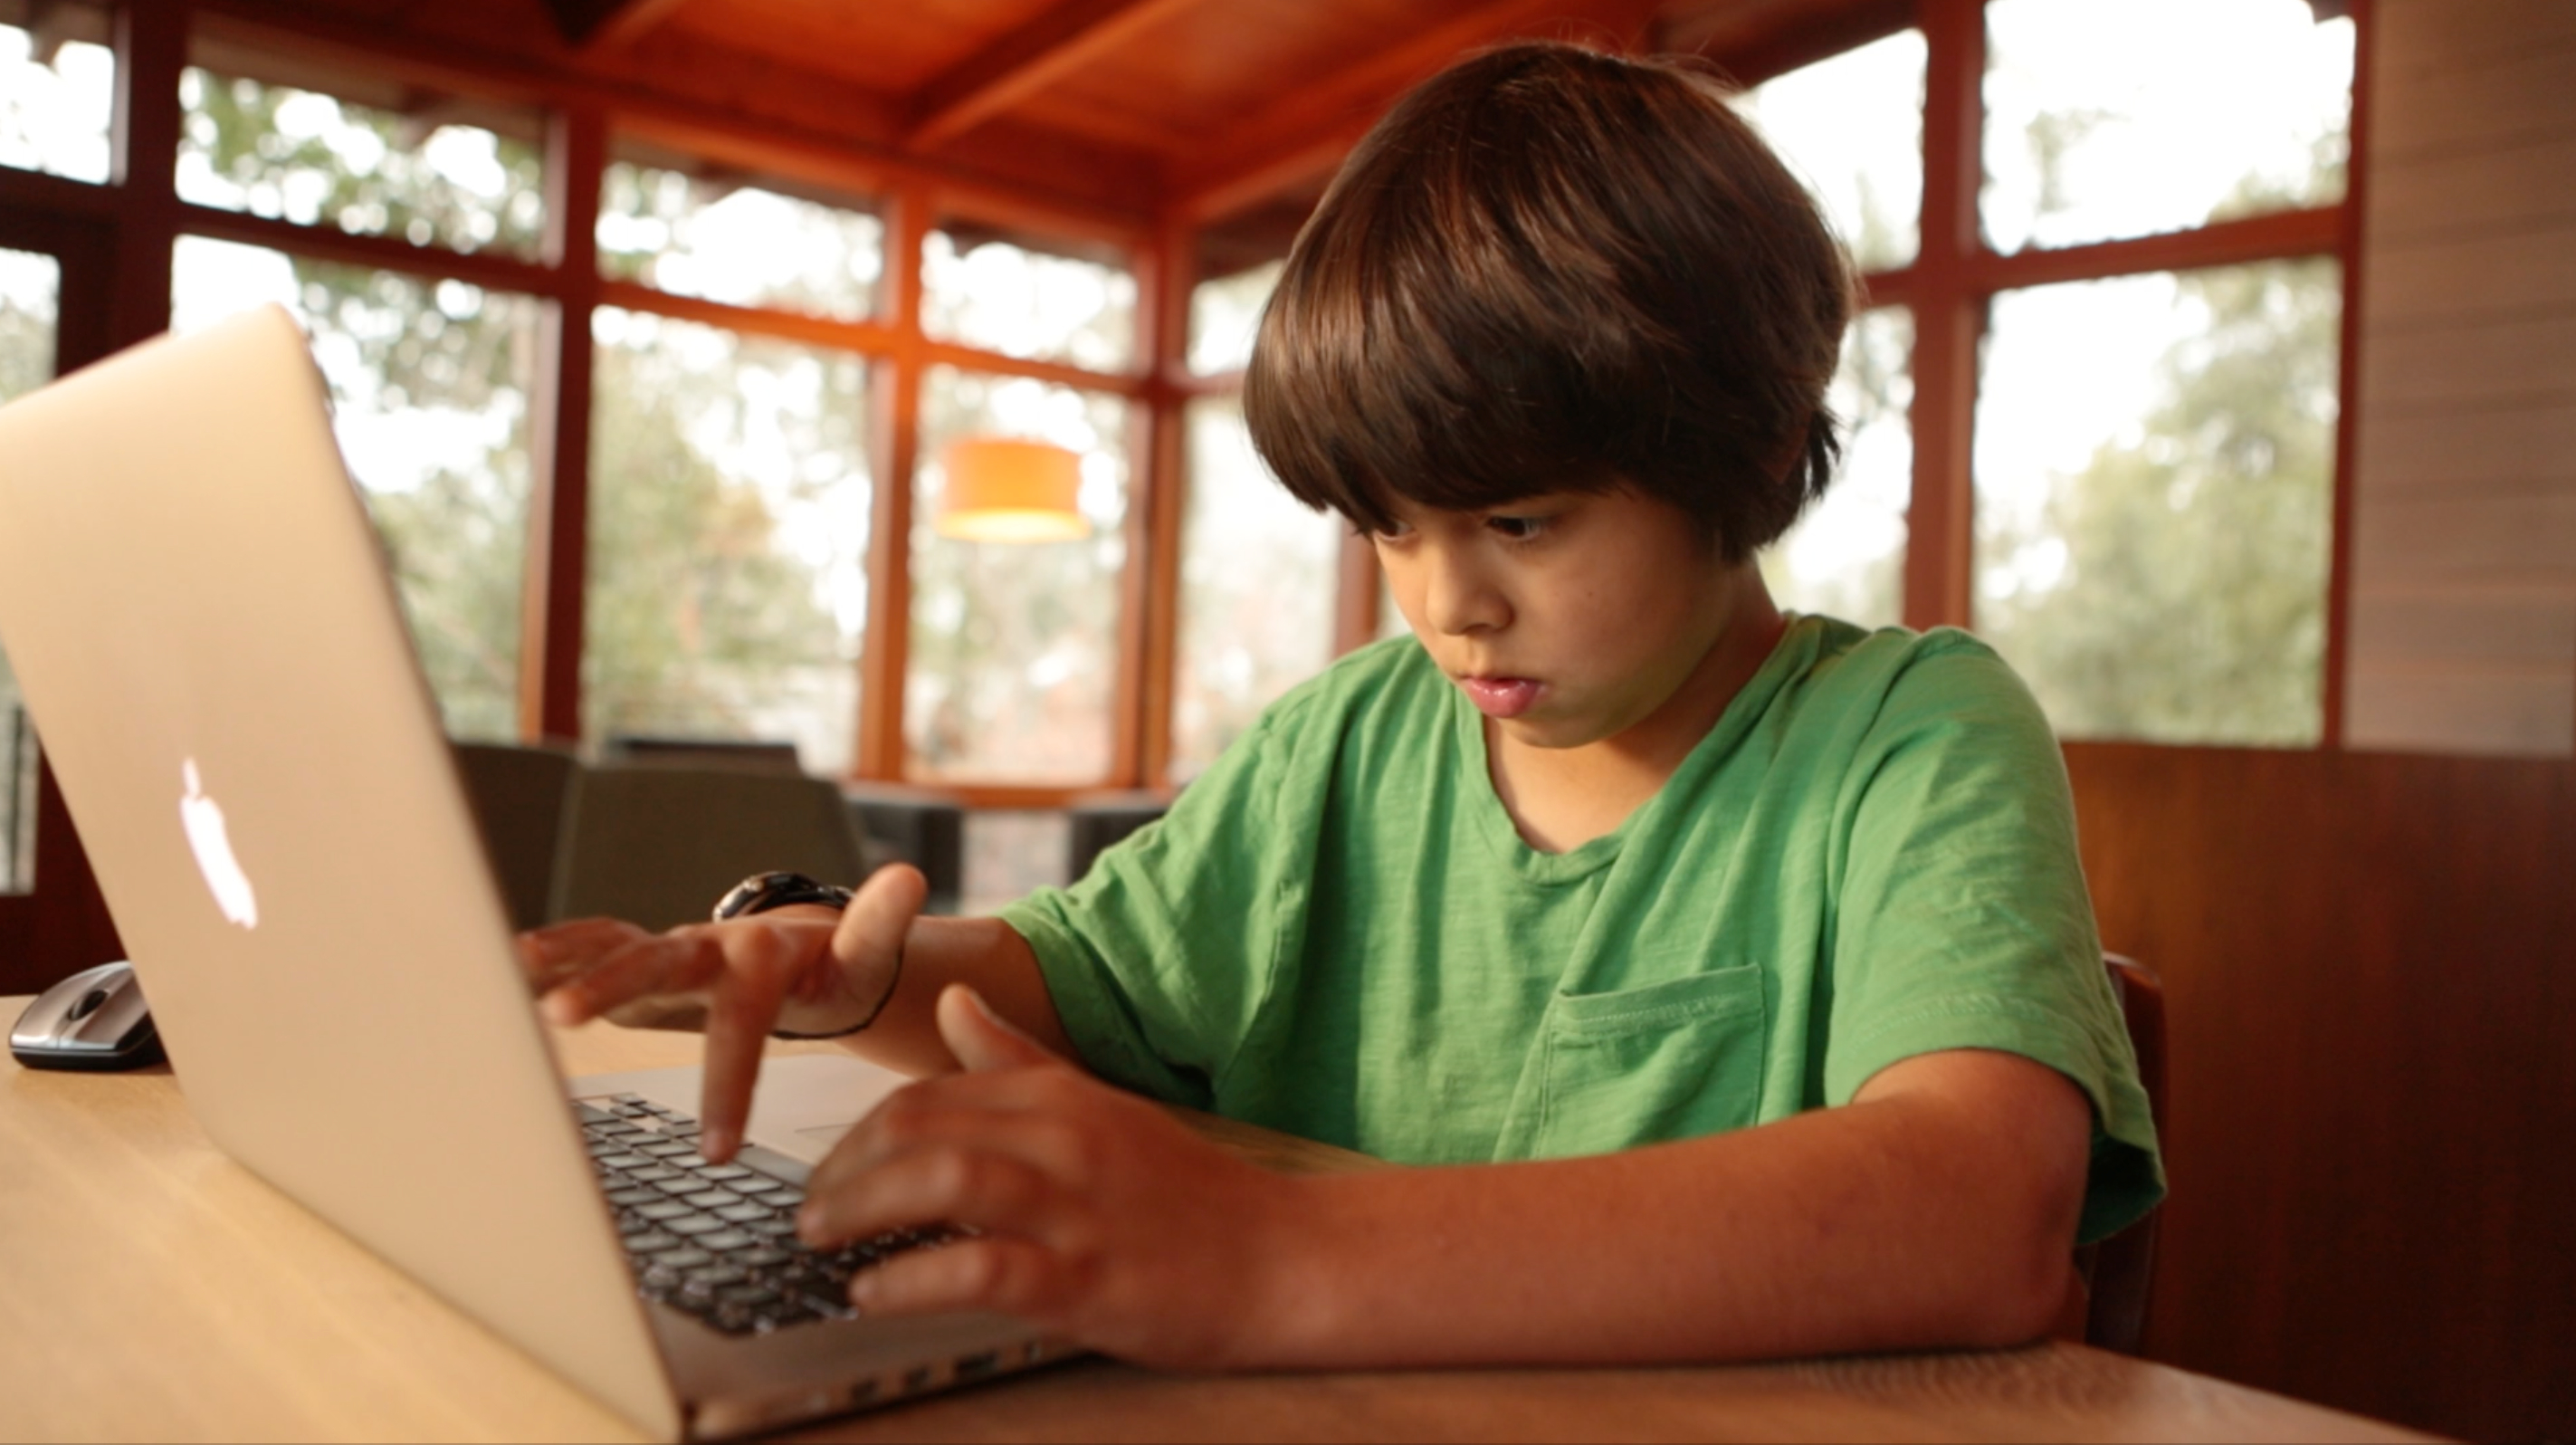 Keep your children sharp through the summer with Brain Chase, an online summer learning program.